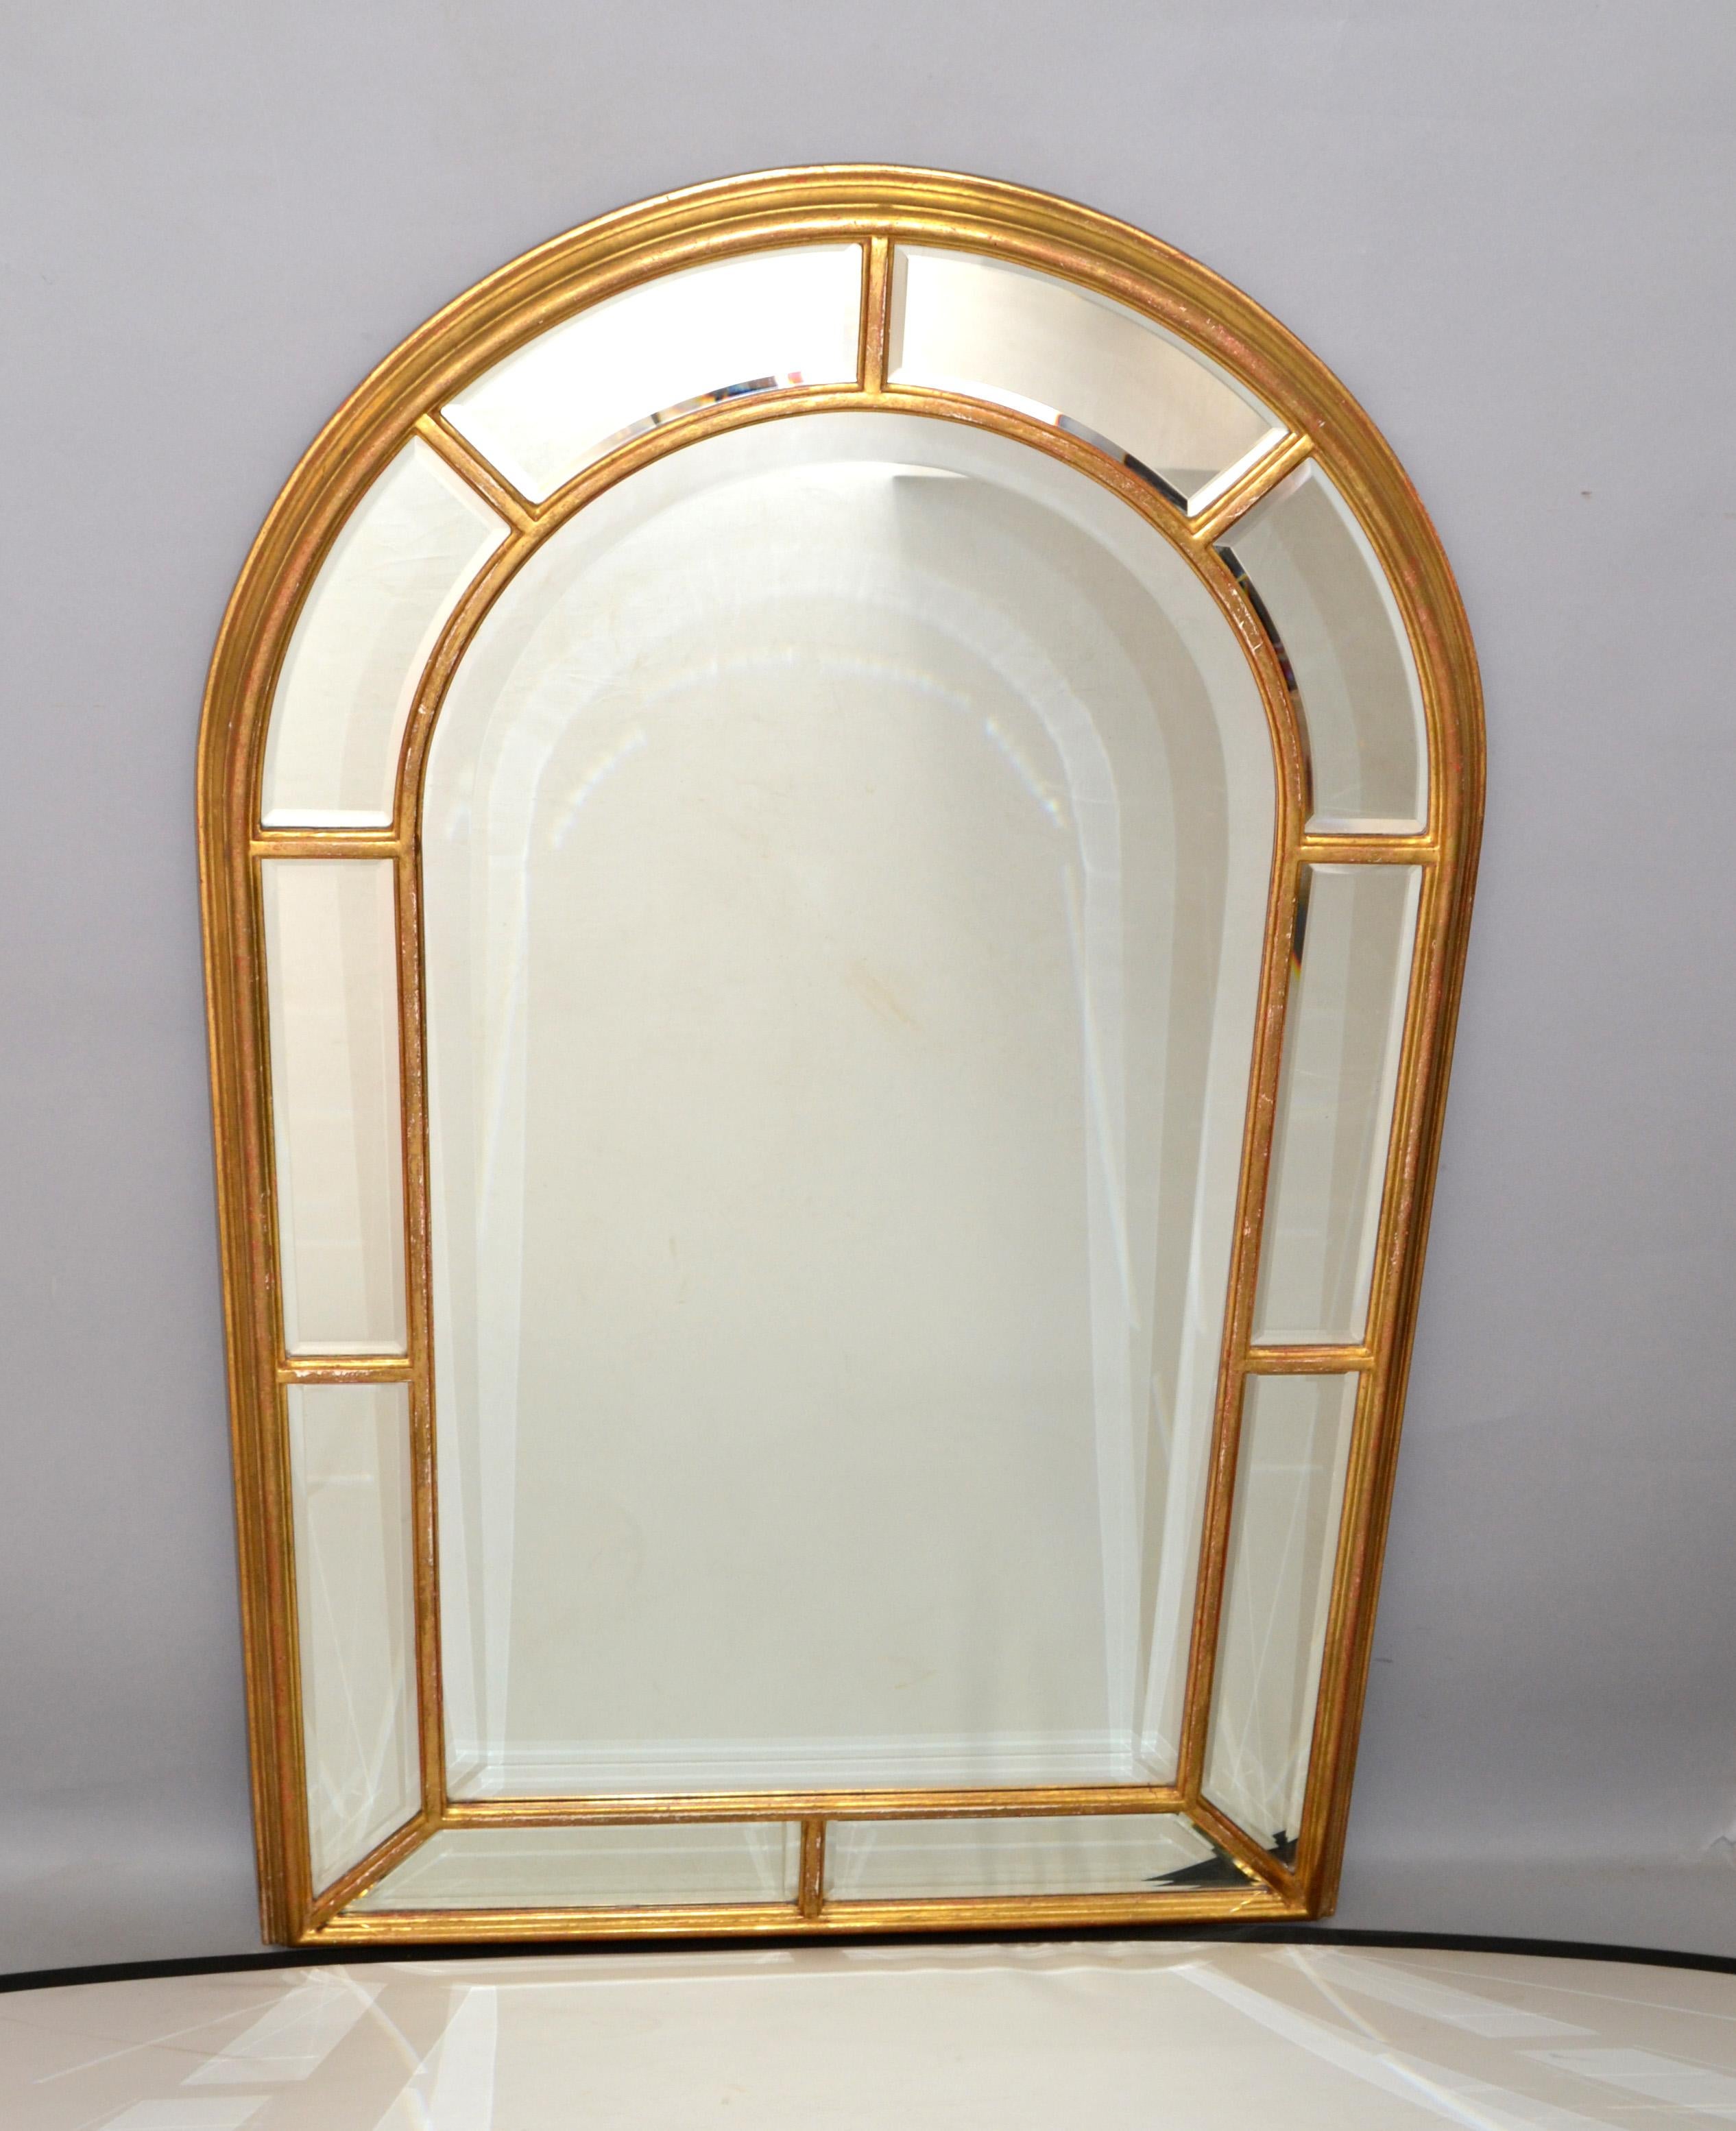 1970s Arch Shaped Italian Firenze Beveled Glass Wall Mirror with Gilt Wood Frame For Sale 1